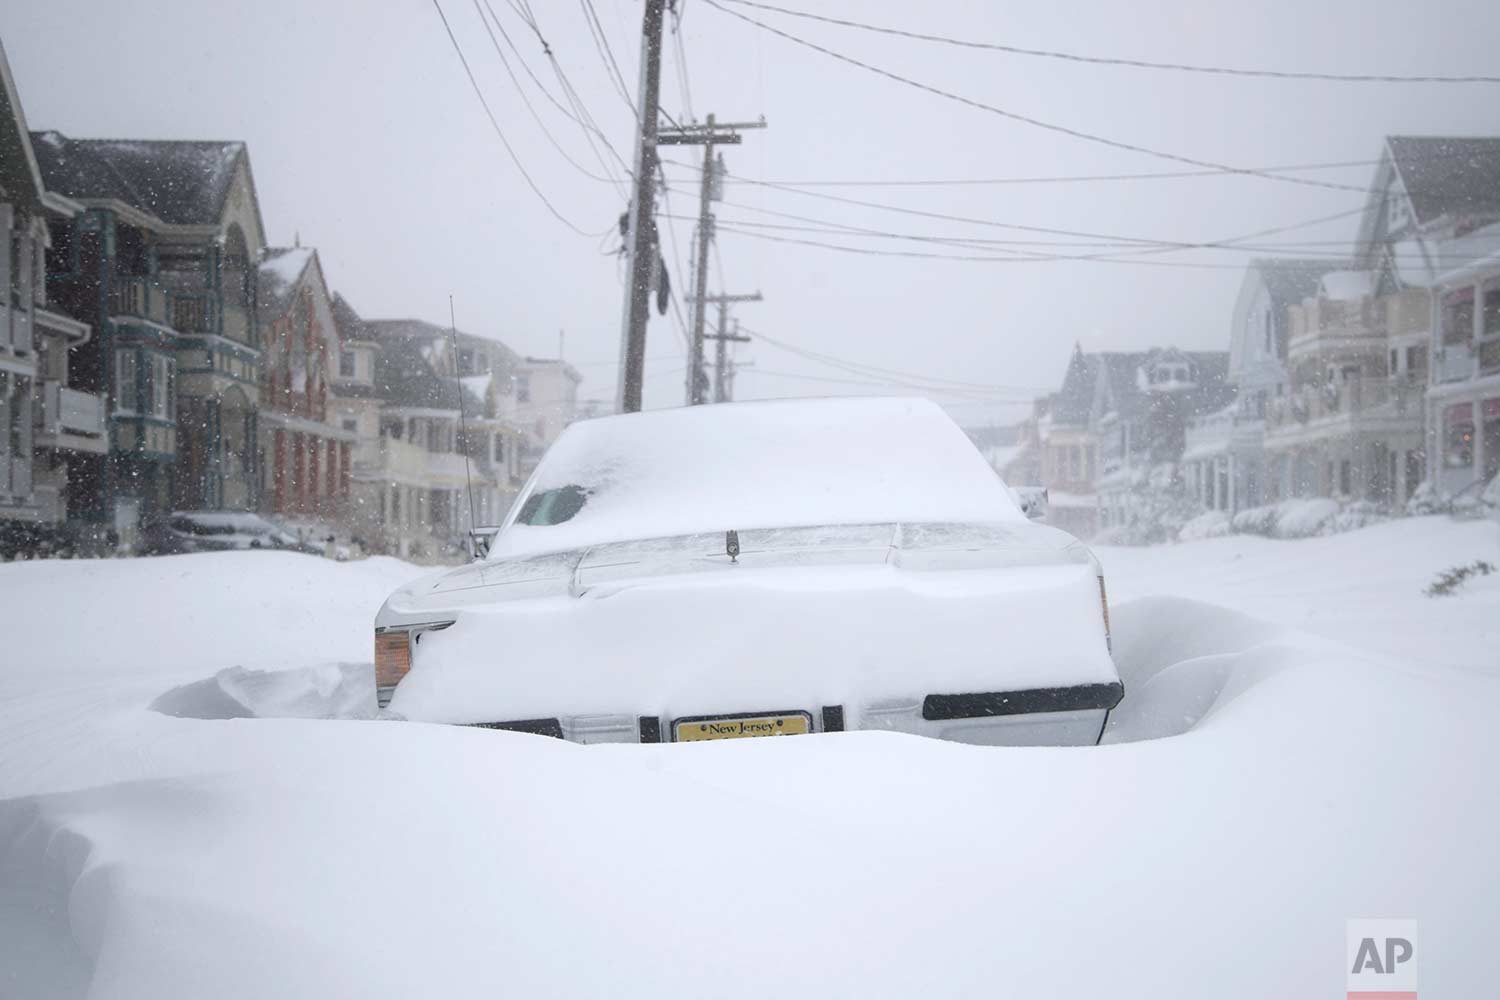  A vehicle parked on Abbott Avenue is engulfed by snowdrifts during a snowstorm that hit the New Jersey Shore, Thursday, Jan. 4, 2018, in Ocean Grove, N.J. (AP Photo/Julio Cortez) 